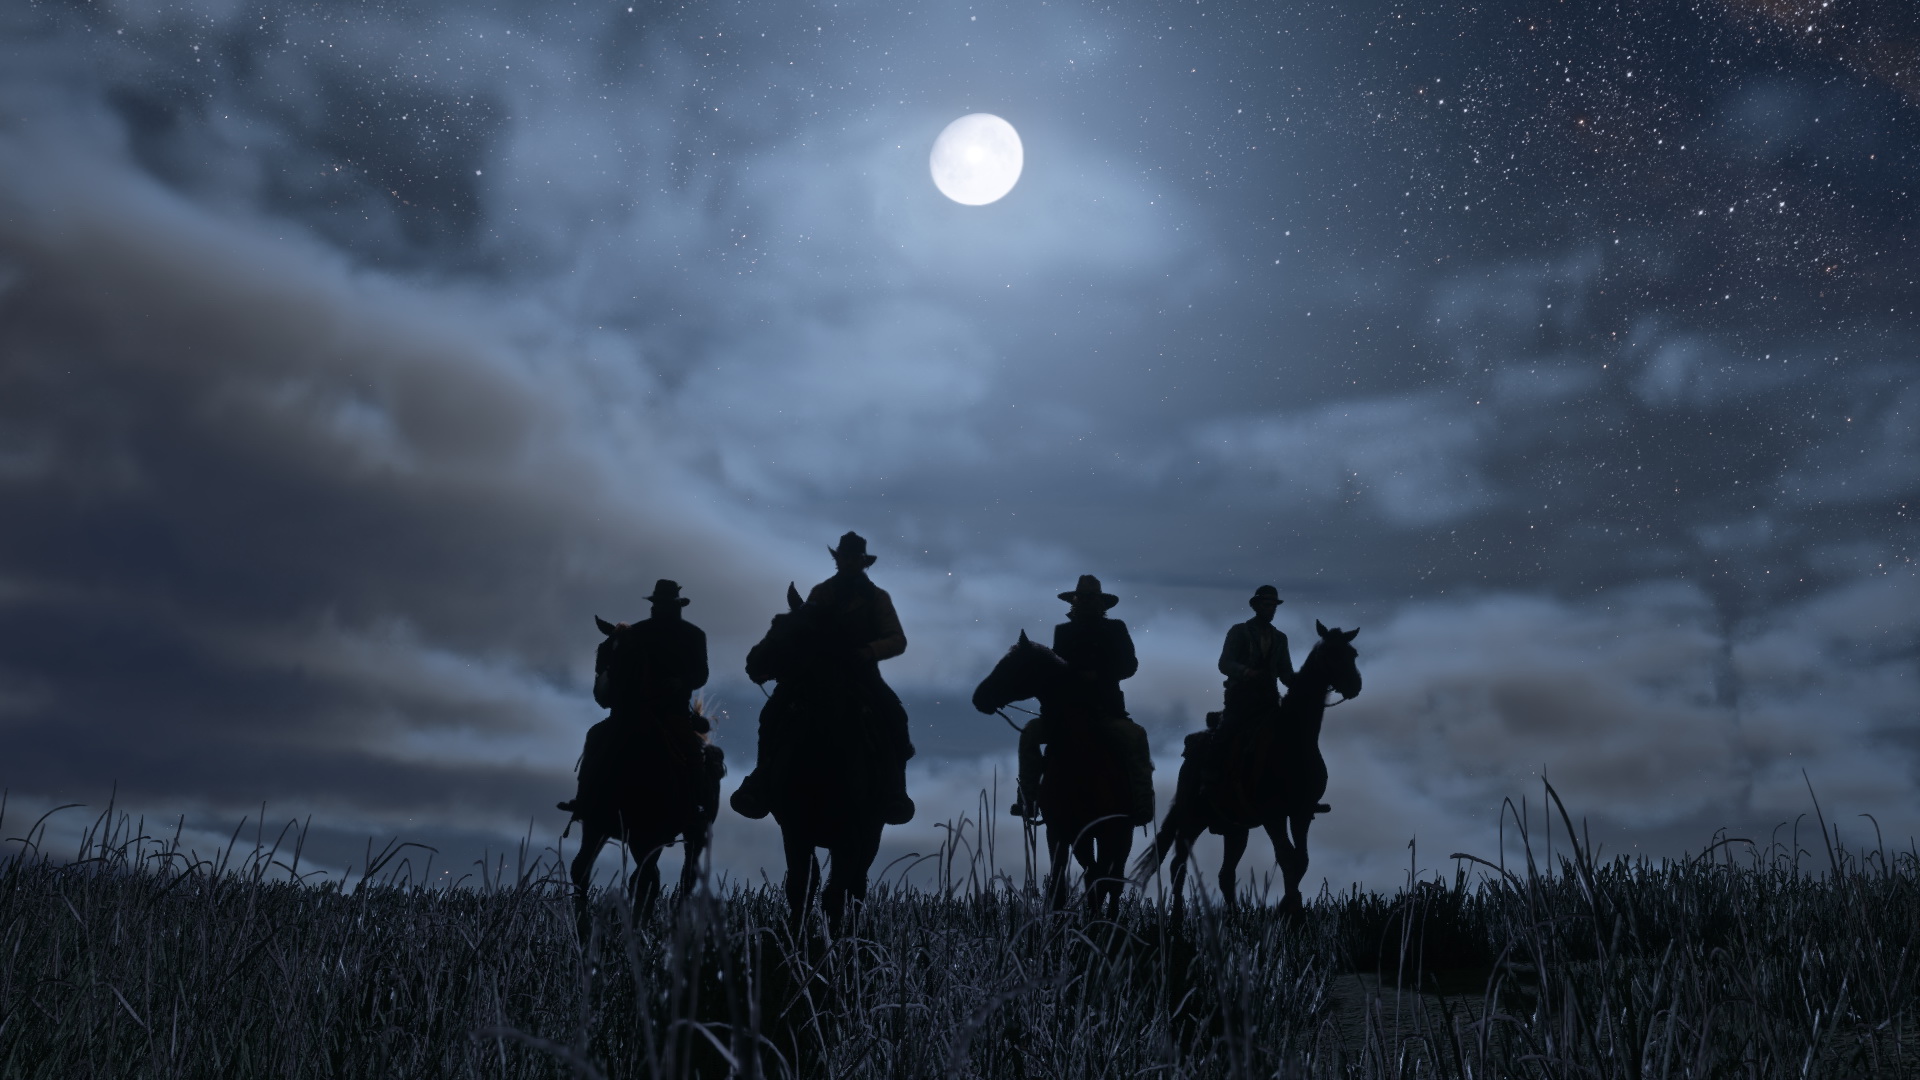 Red Dead Redemption 2 Is Now Coming Spring 2018 Rockstar Games